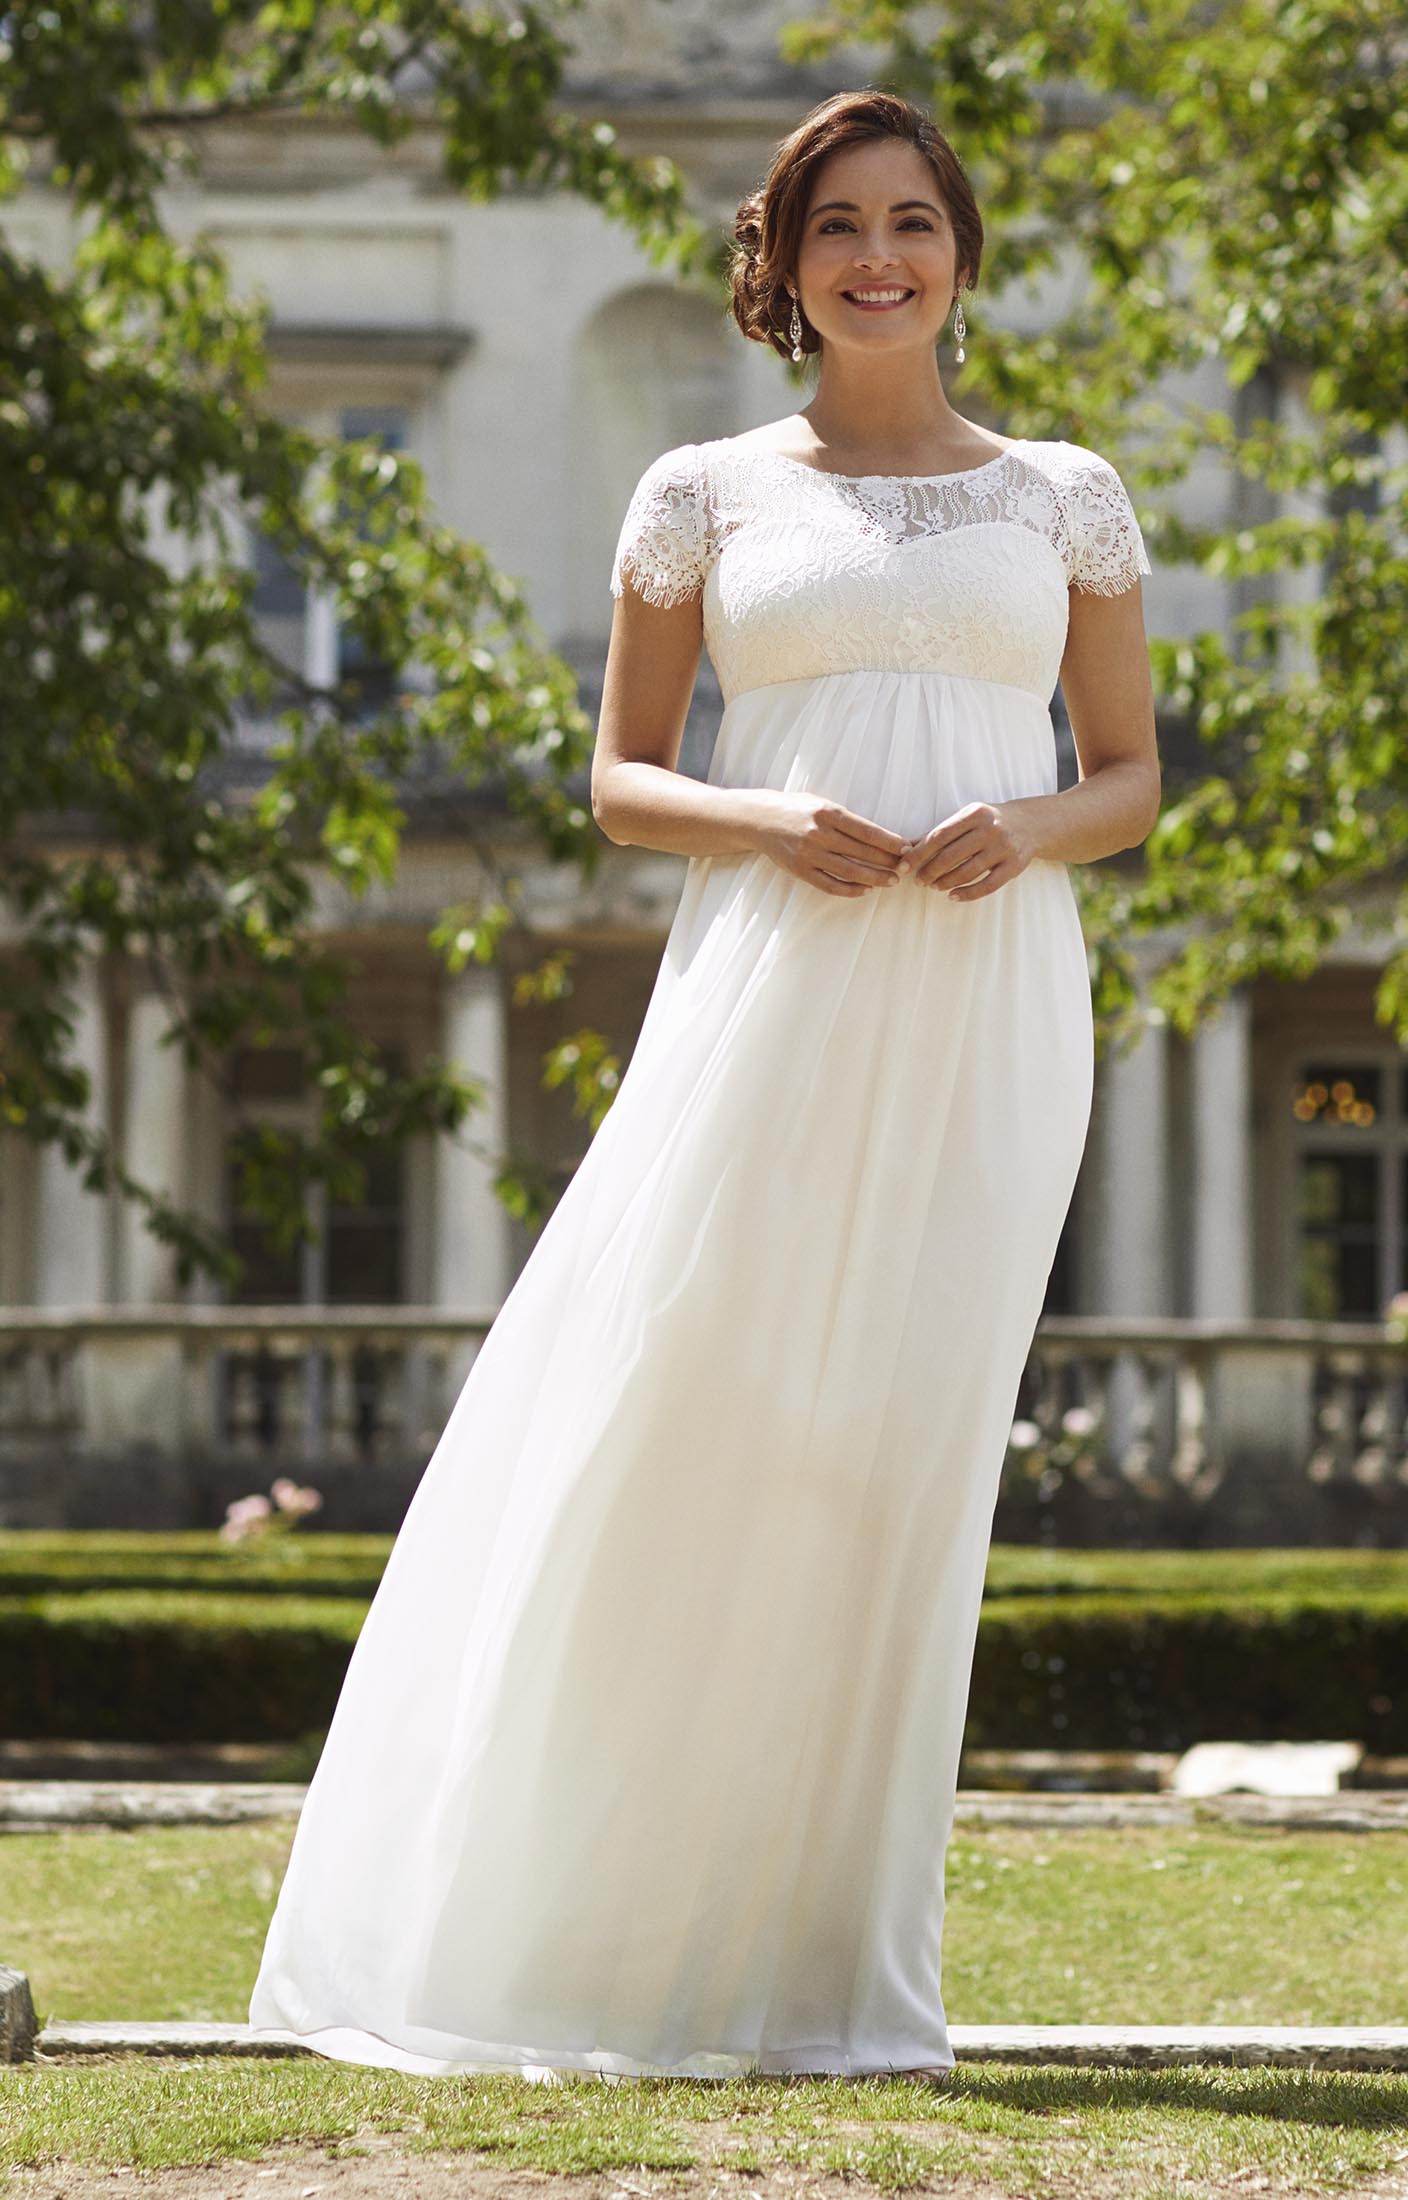 Blooming Gorgeous - Floral Bridal Wear - The Wedding Community